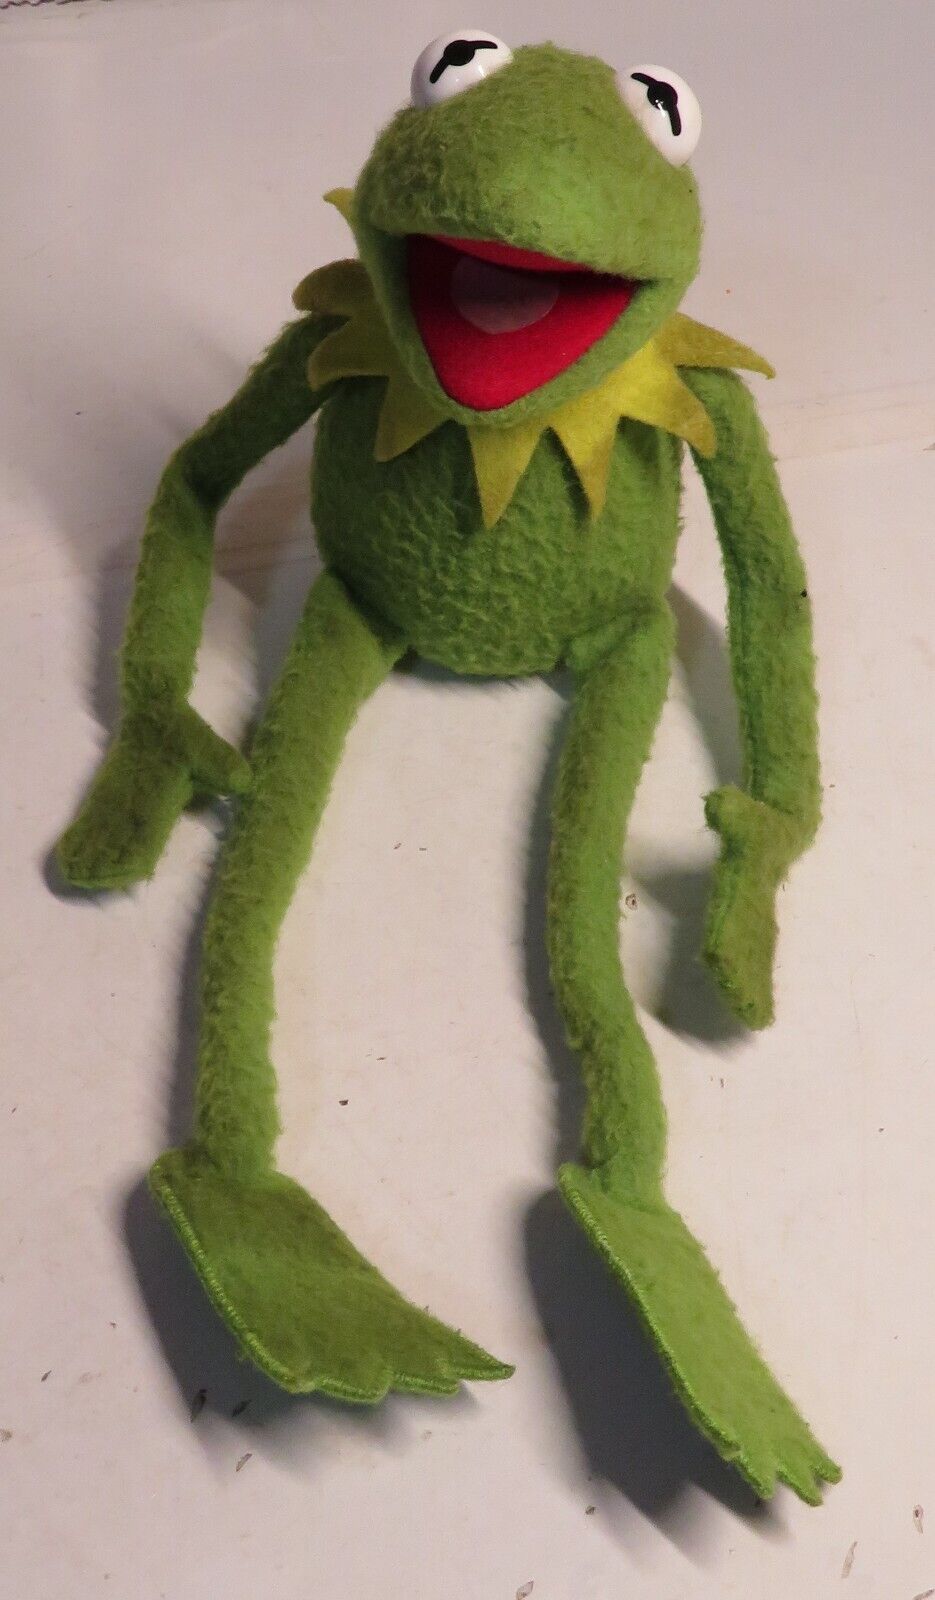 RARE Vintage The Muppets Kermit the Frog Puppet Eden Toys 10” Plush Stuffed Frog